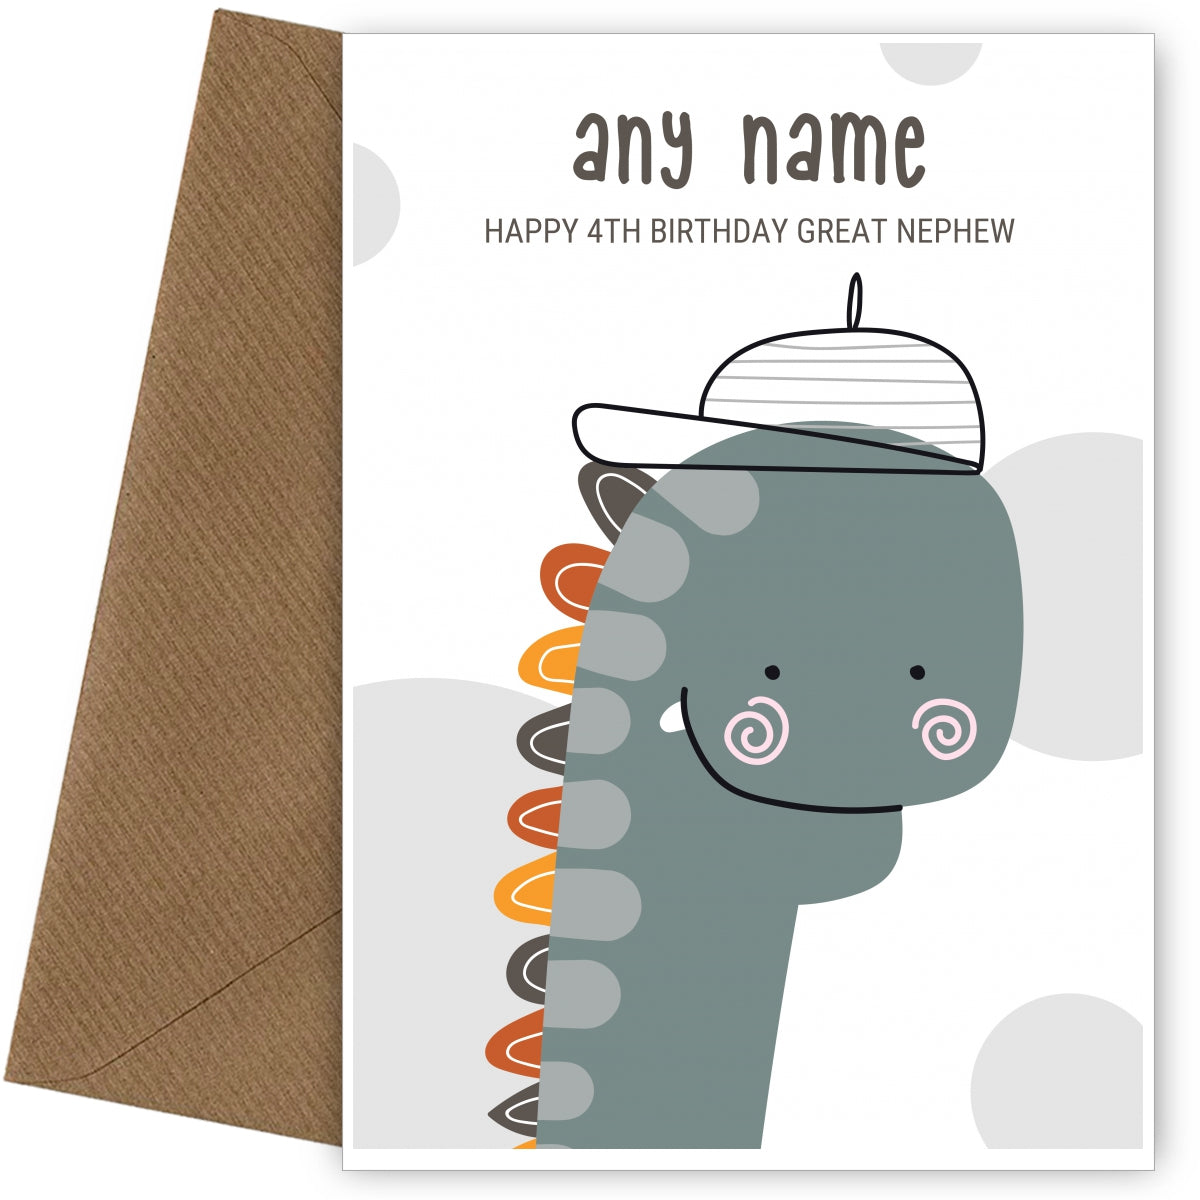 Happy 4th Birthday Card for Great Nephew - Dinosaur with Cap